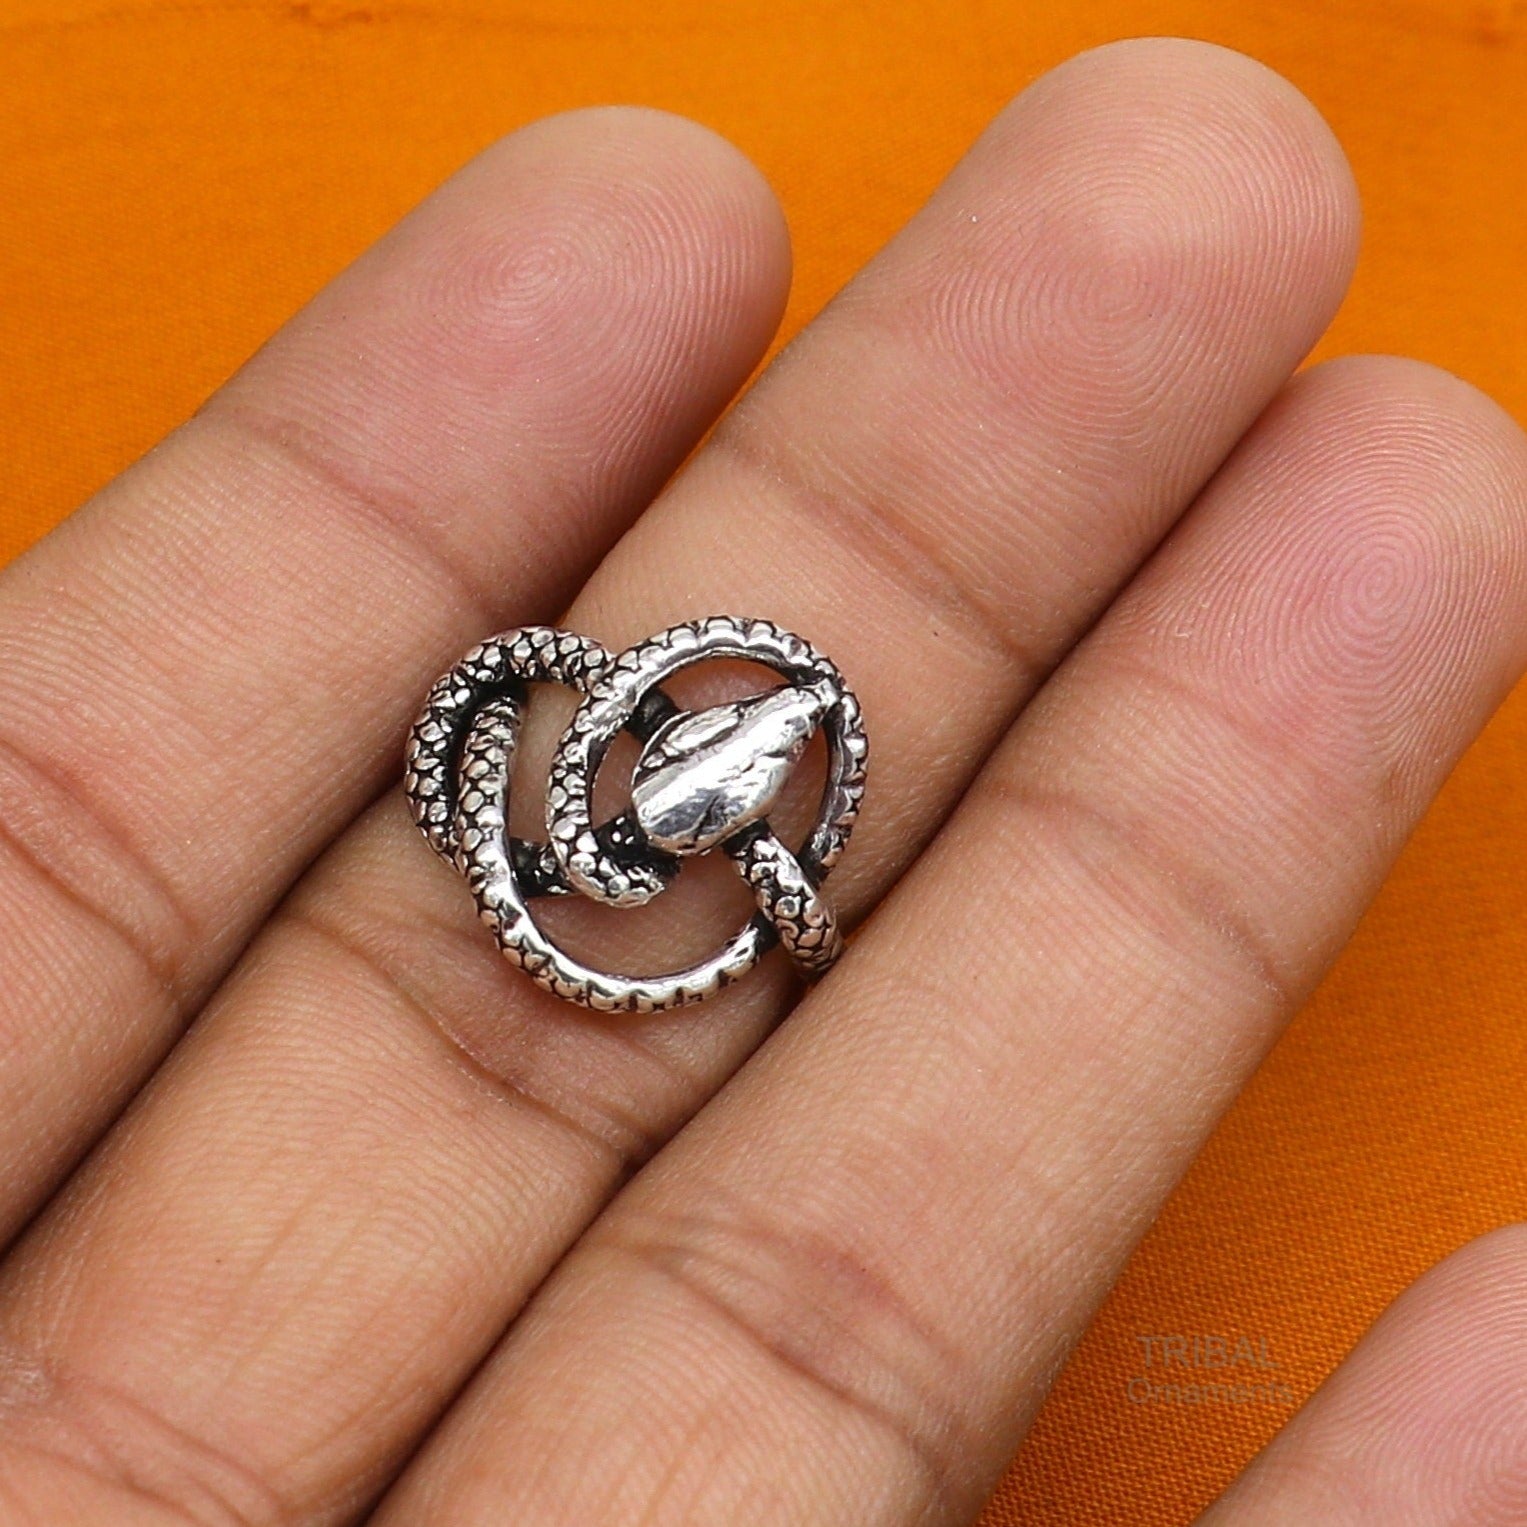 Buy Sterling Silver Snake Ring Unisex Ring Snake Ring One-of-a-kind Snake  Online in India - Etsy